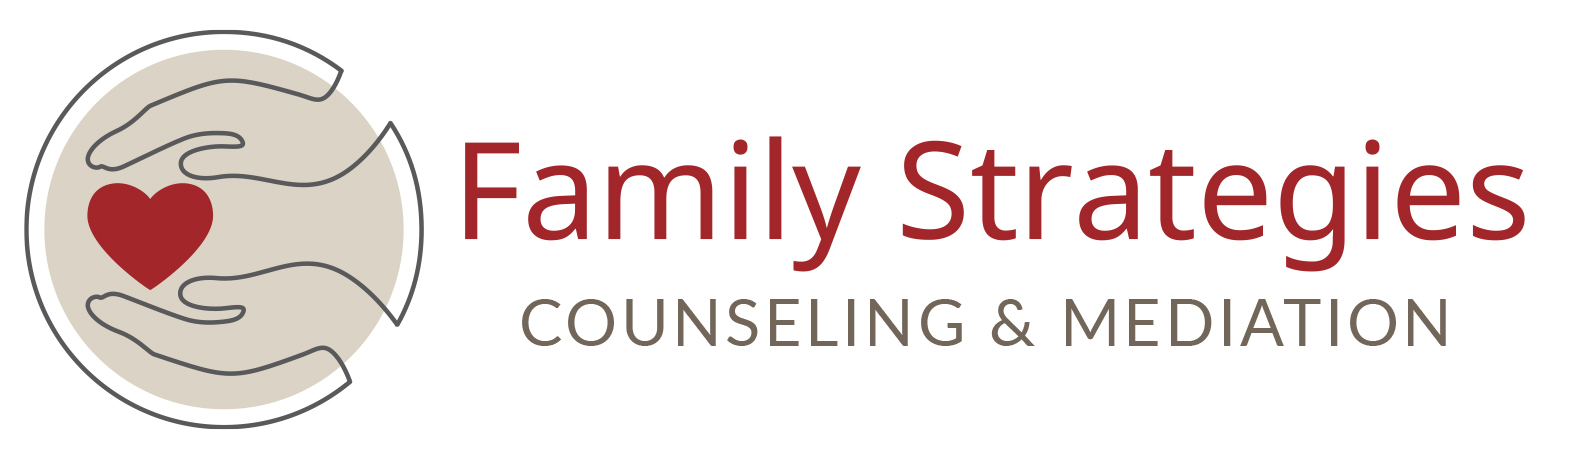 Family Strategies Counseling & Mediation